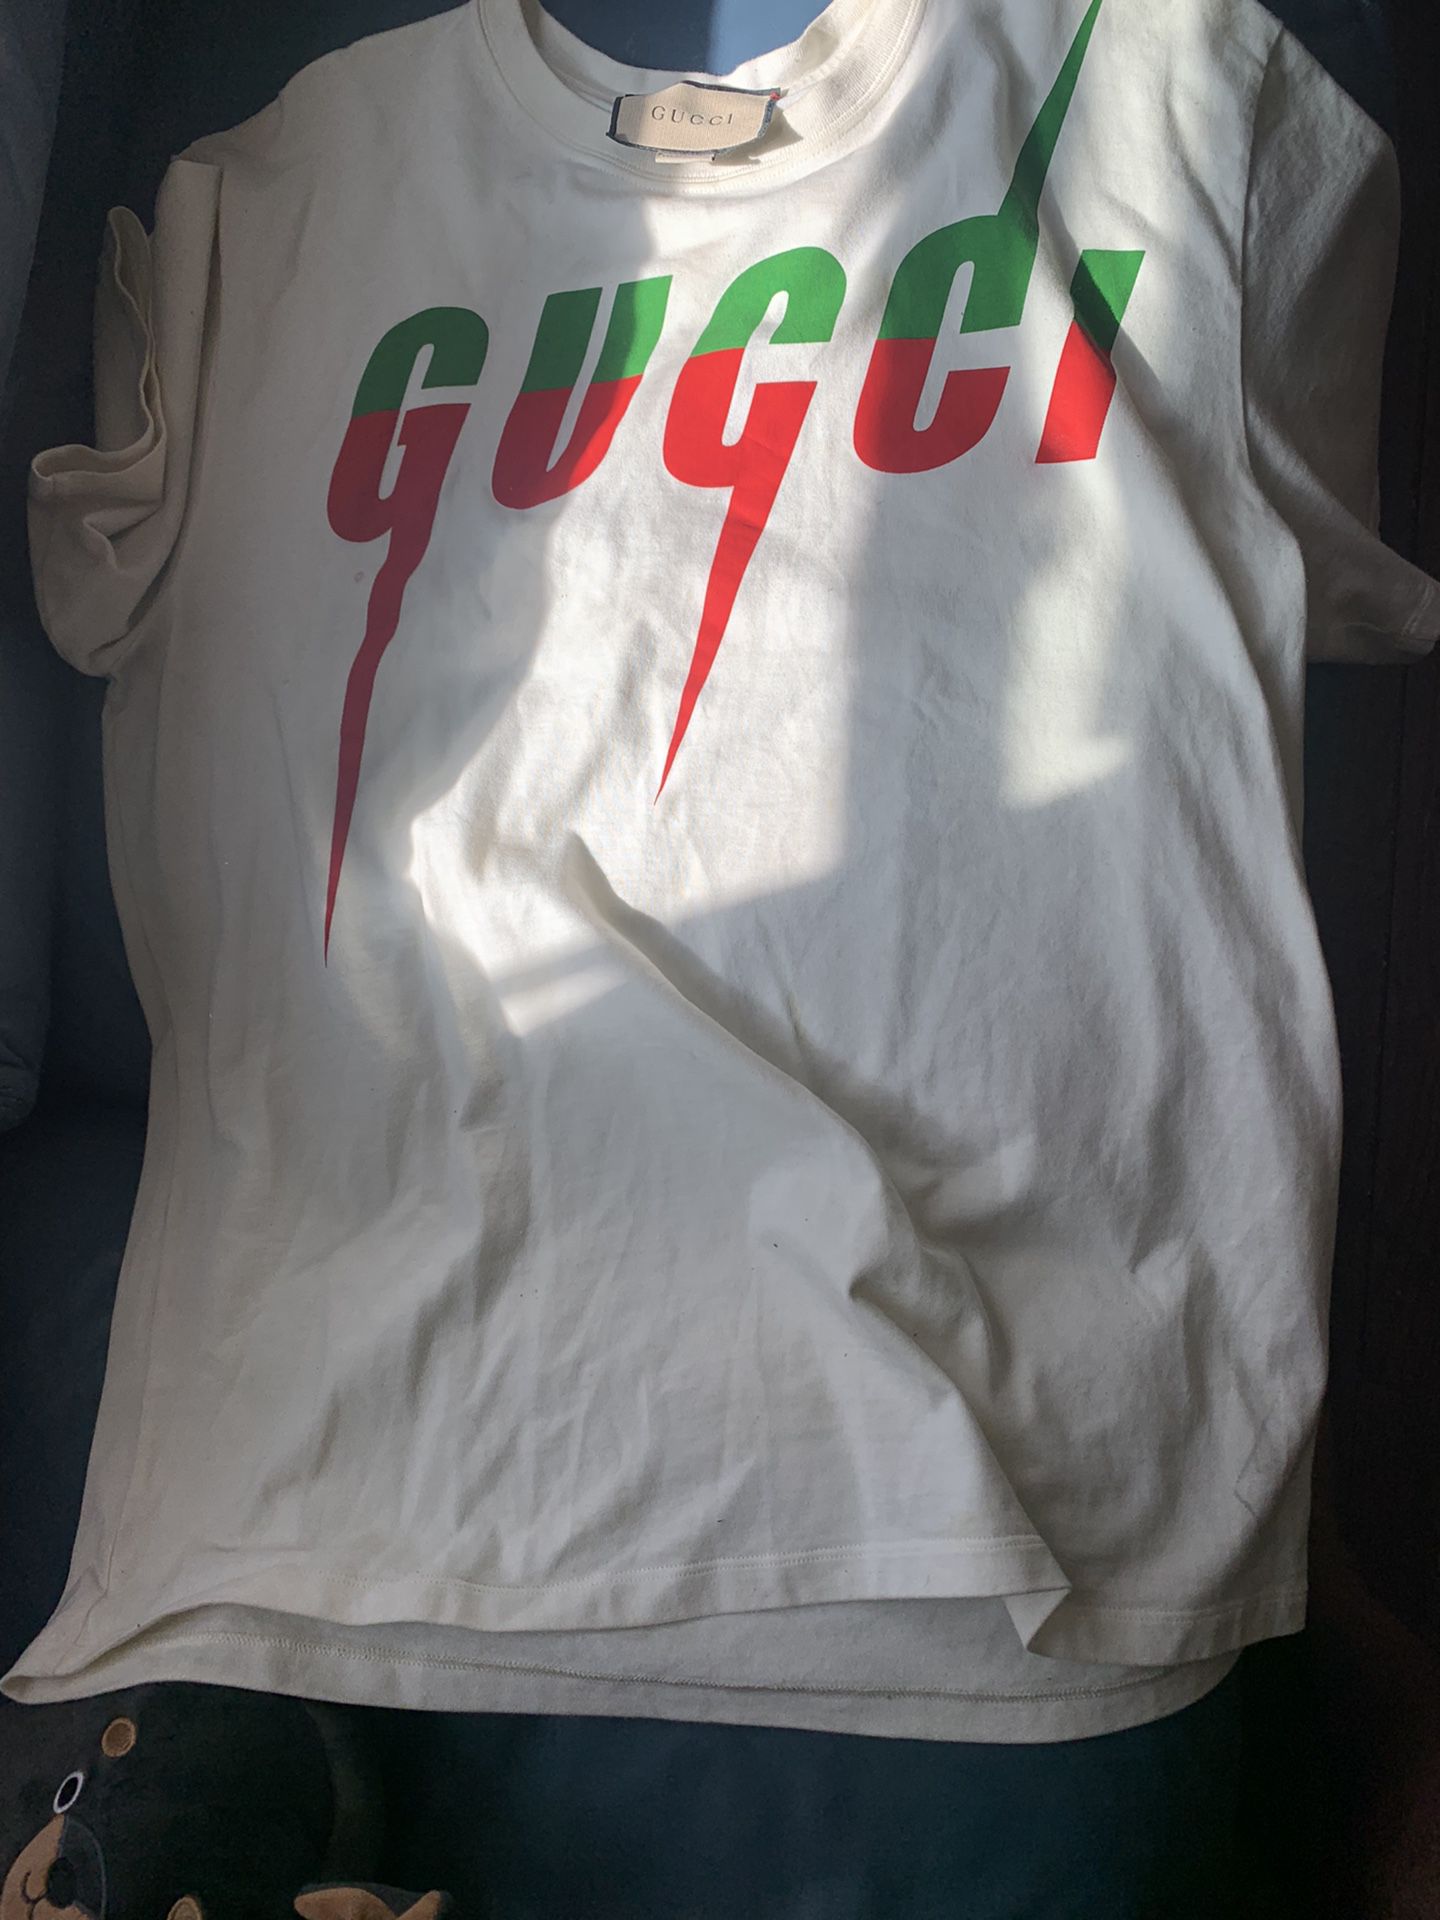 Gucci Shirt Only Worn Once Size Large 